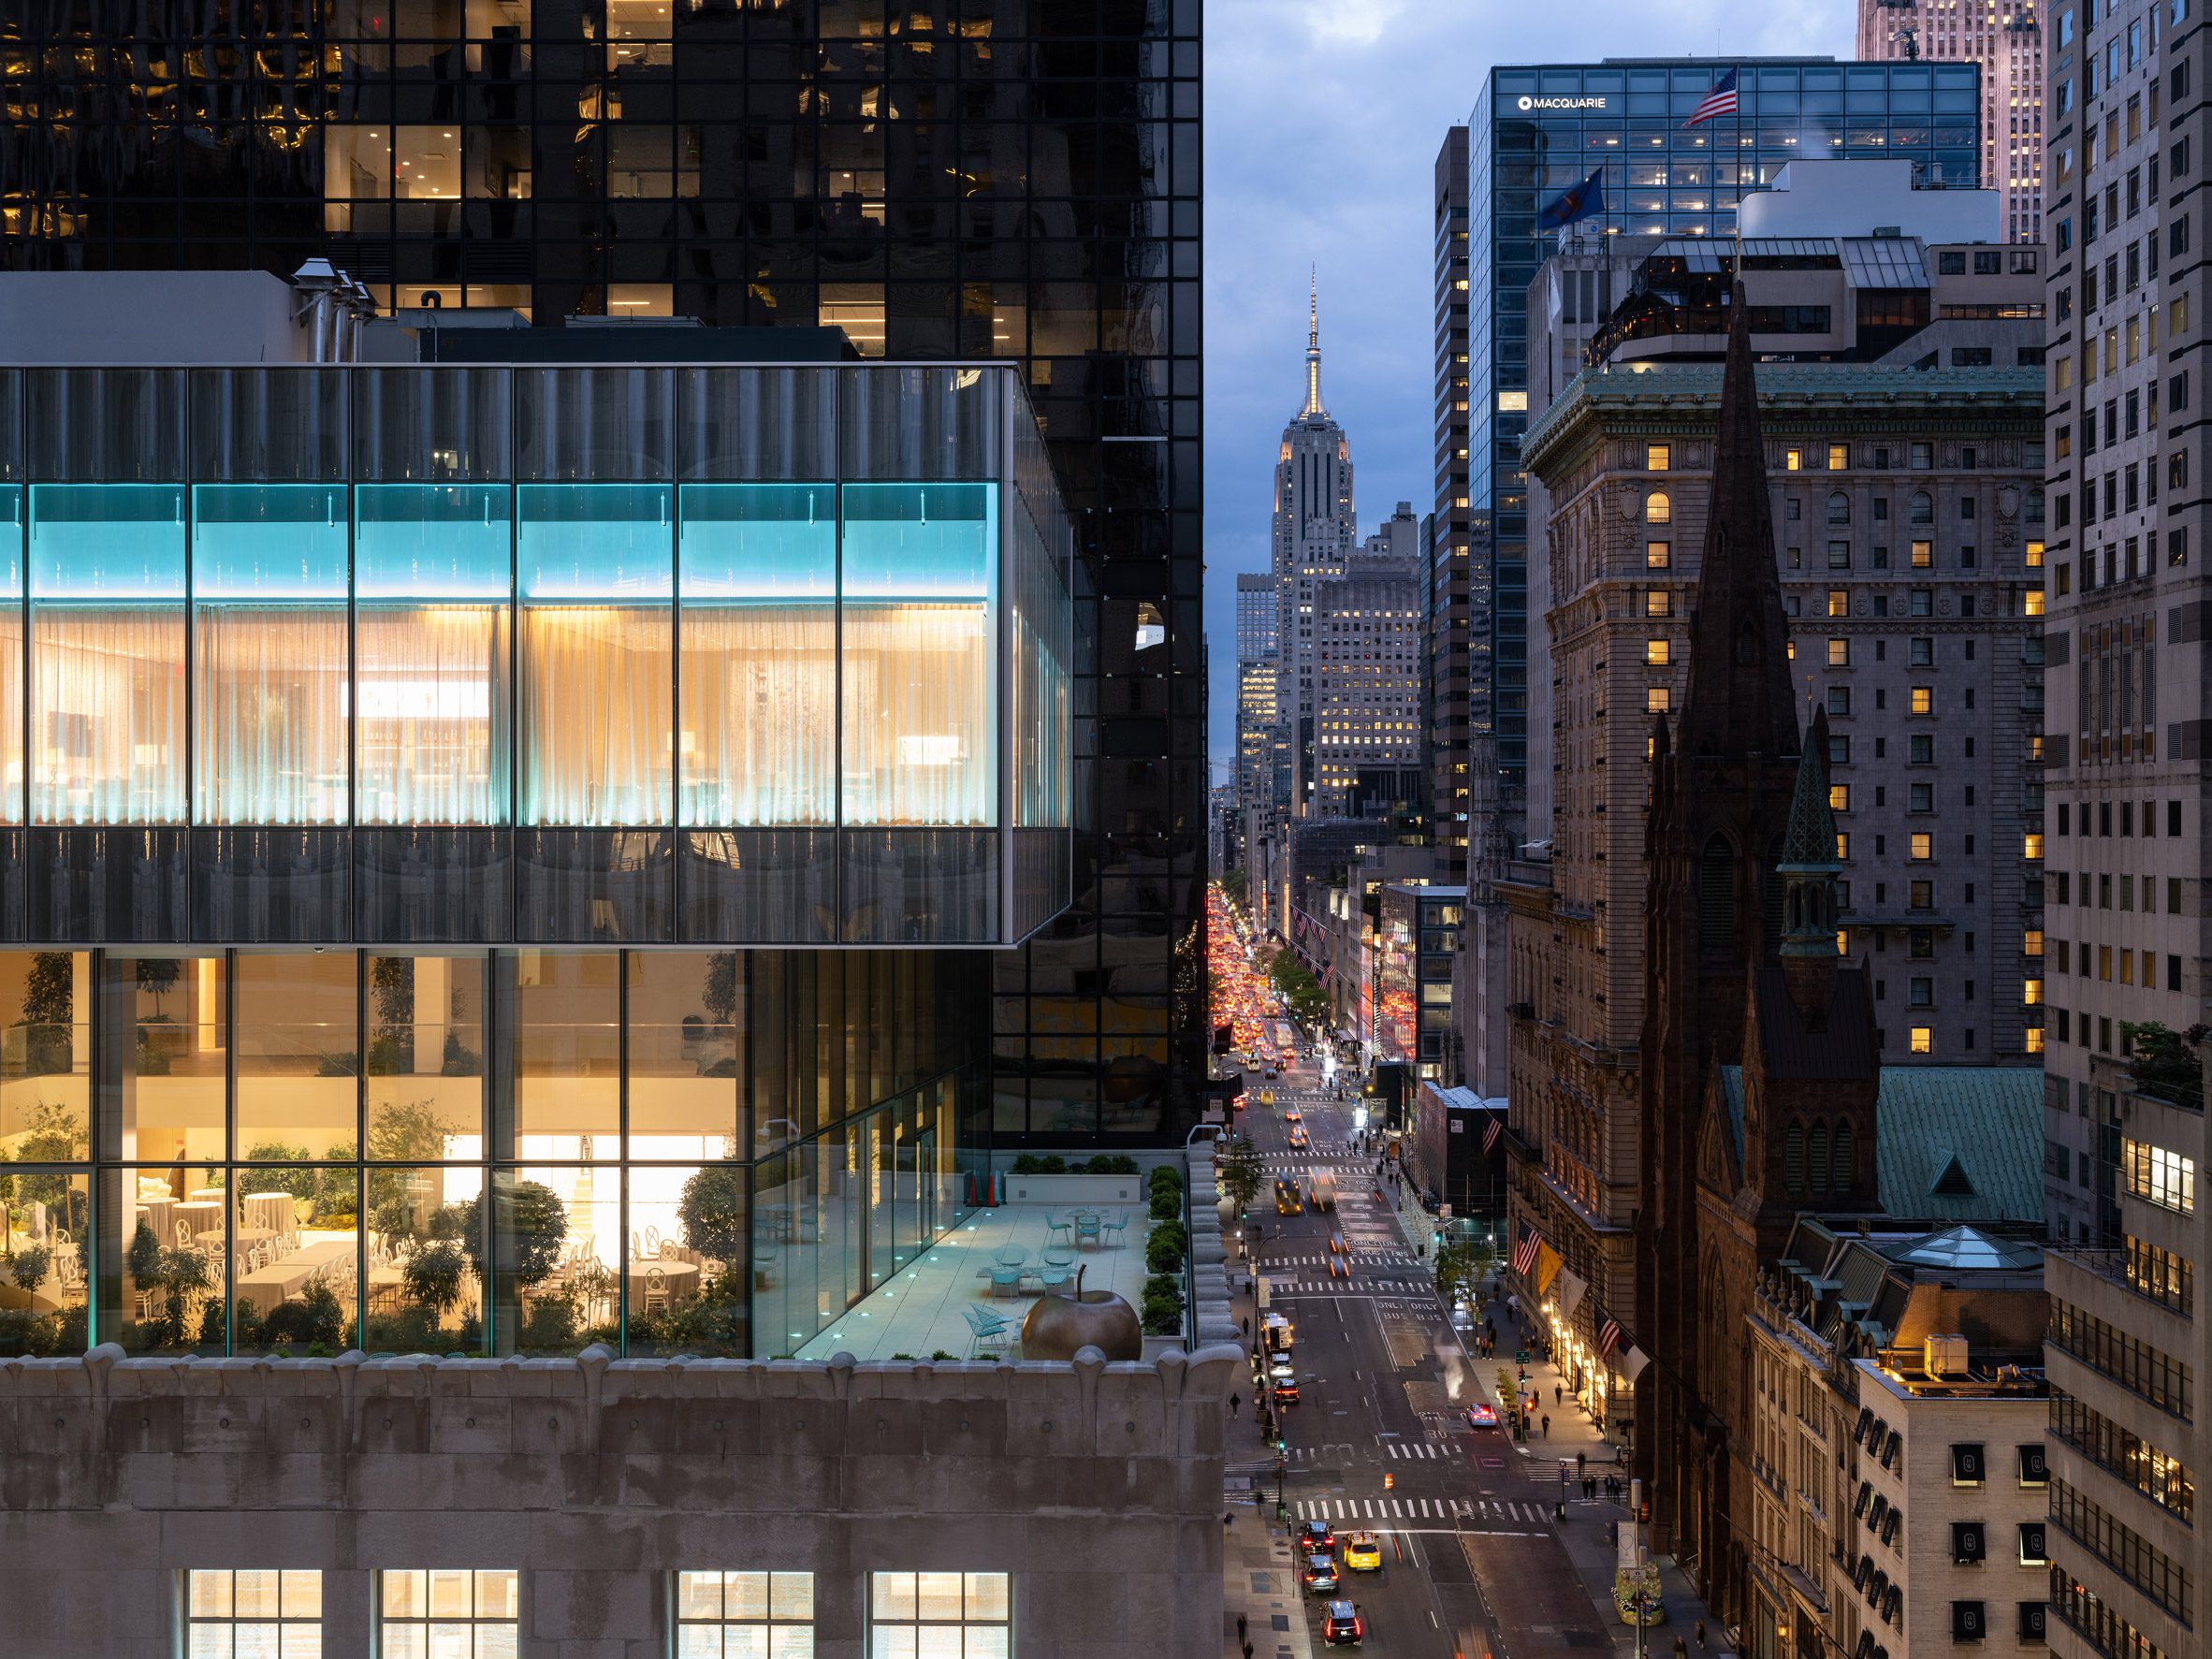 For Tiffany & Co., a Rooftop Addition Wrapped in Glass - The New York Times